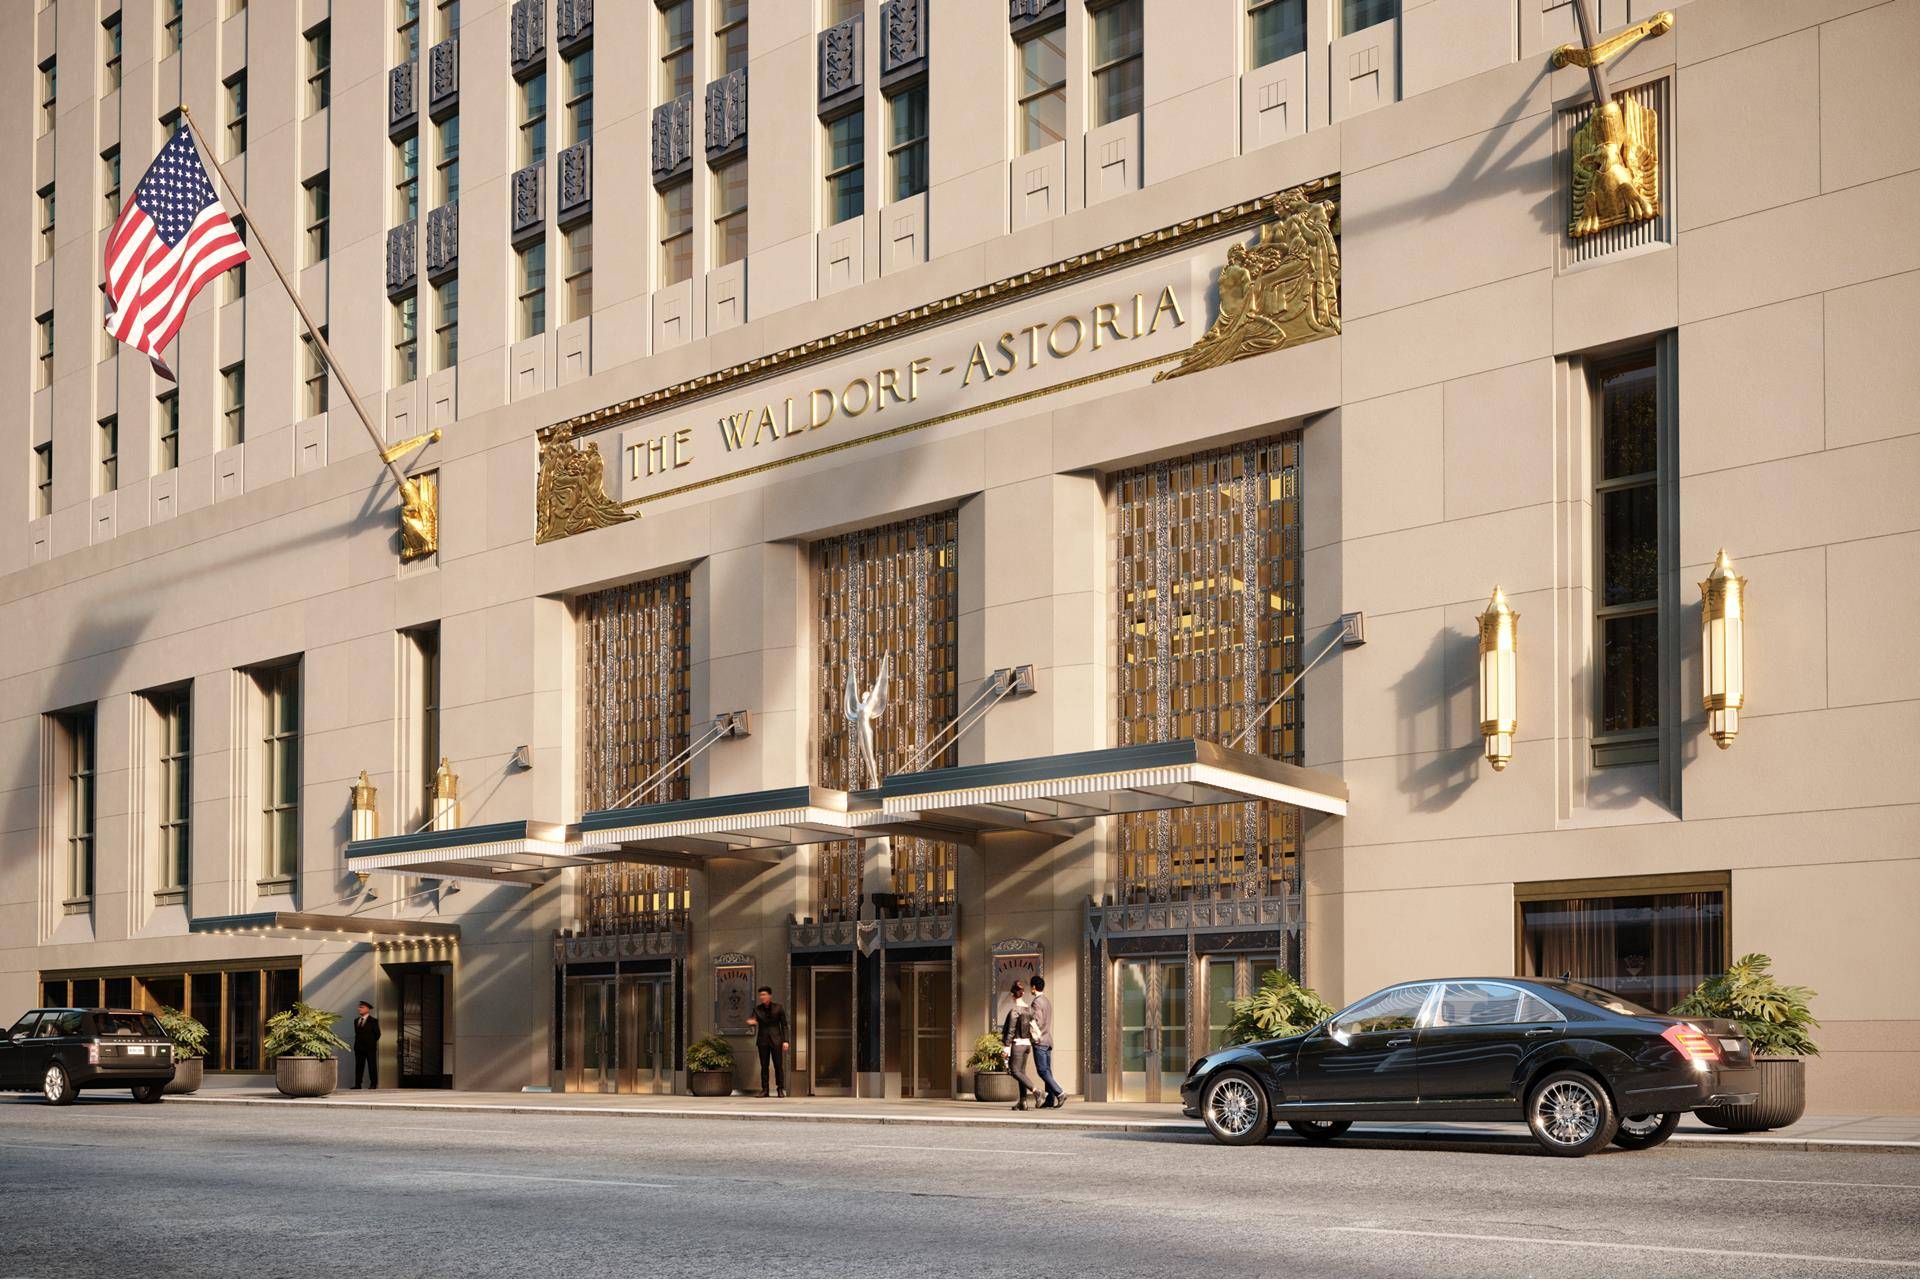 Own a piece of history at The Towers of the Waldorf Astoria.